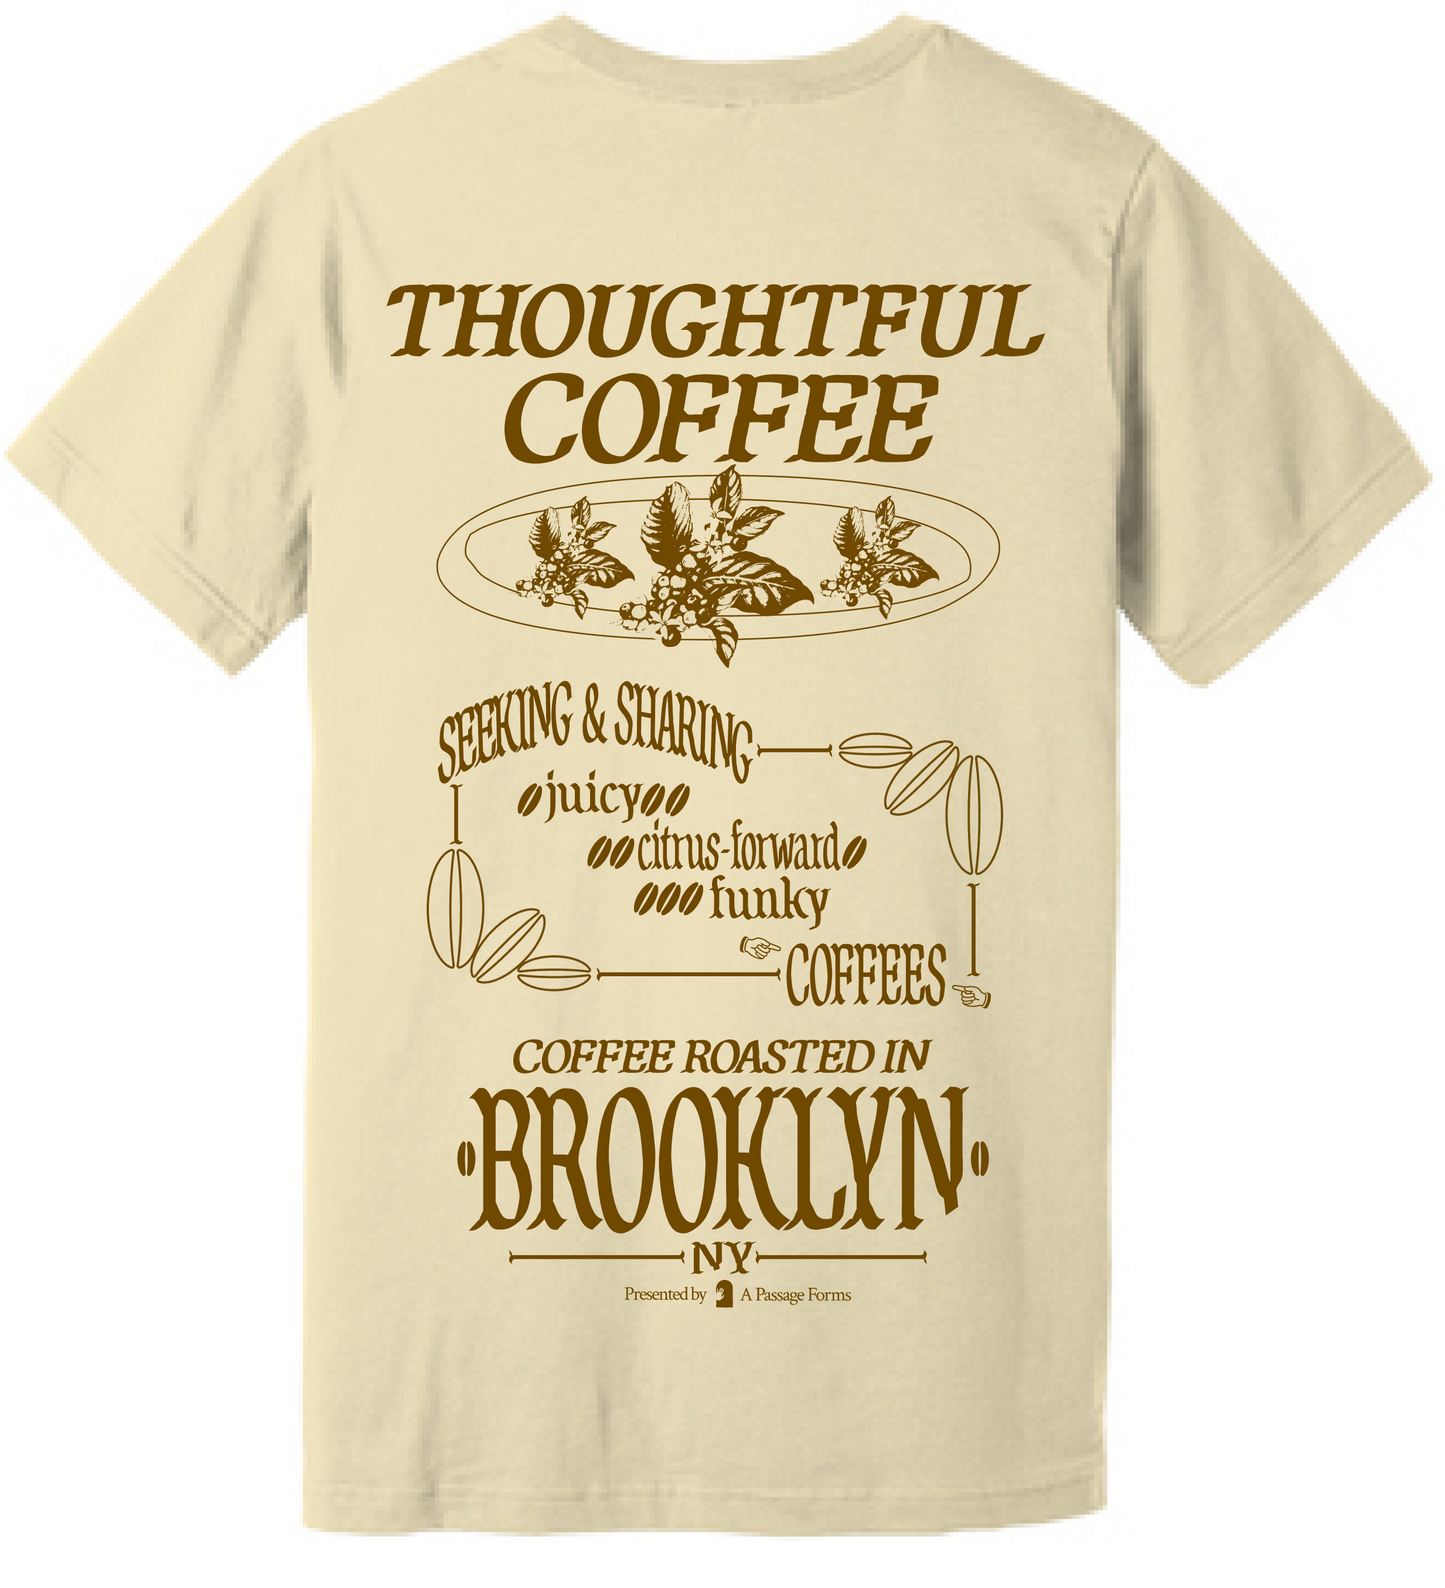 Thoughtfulcoffee x A Passage Forms T-shirt